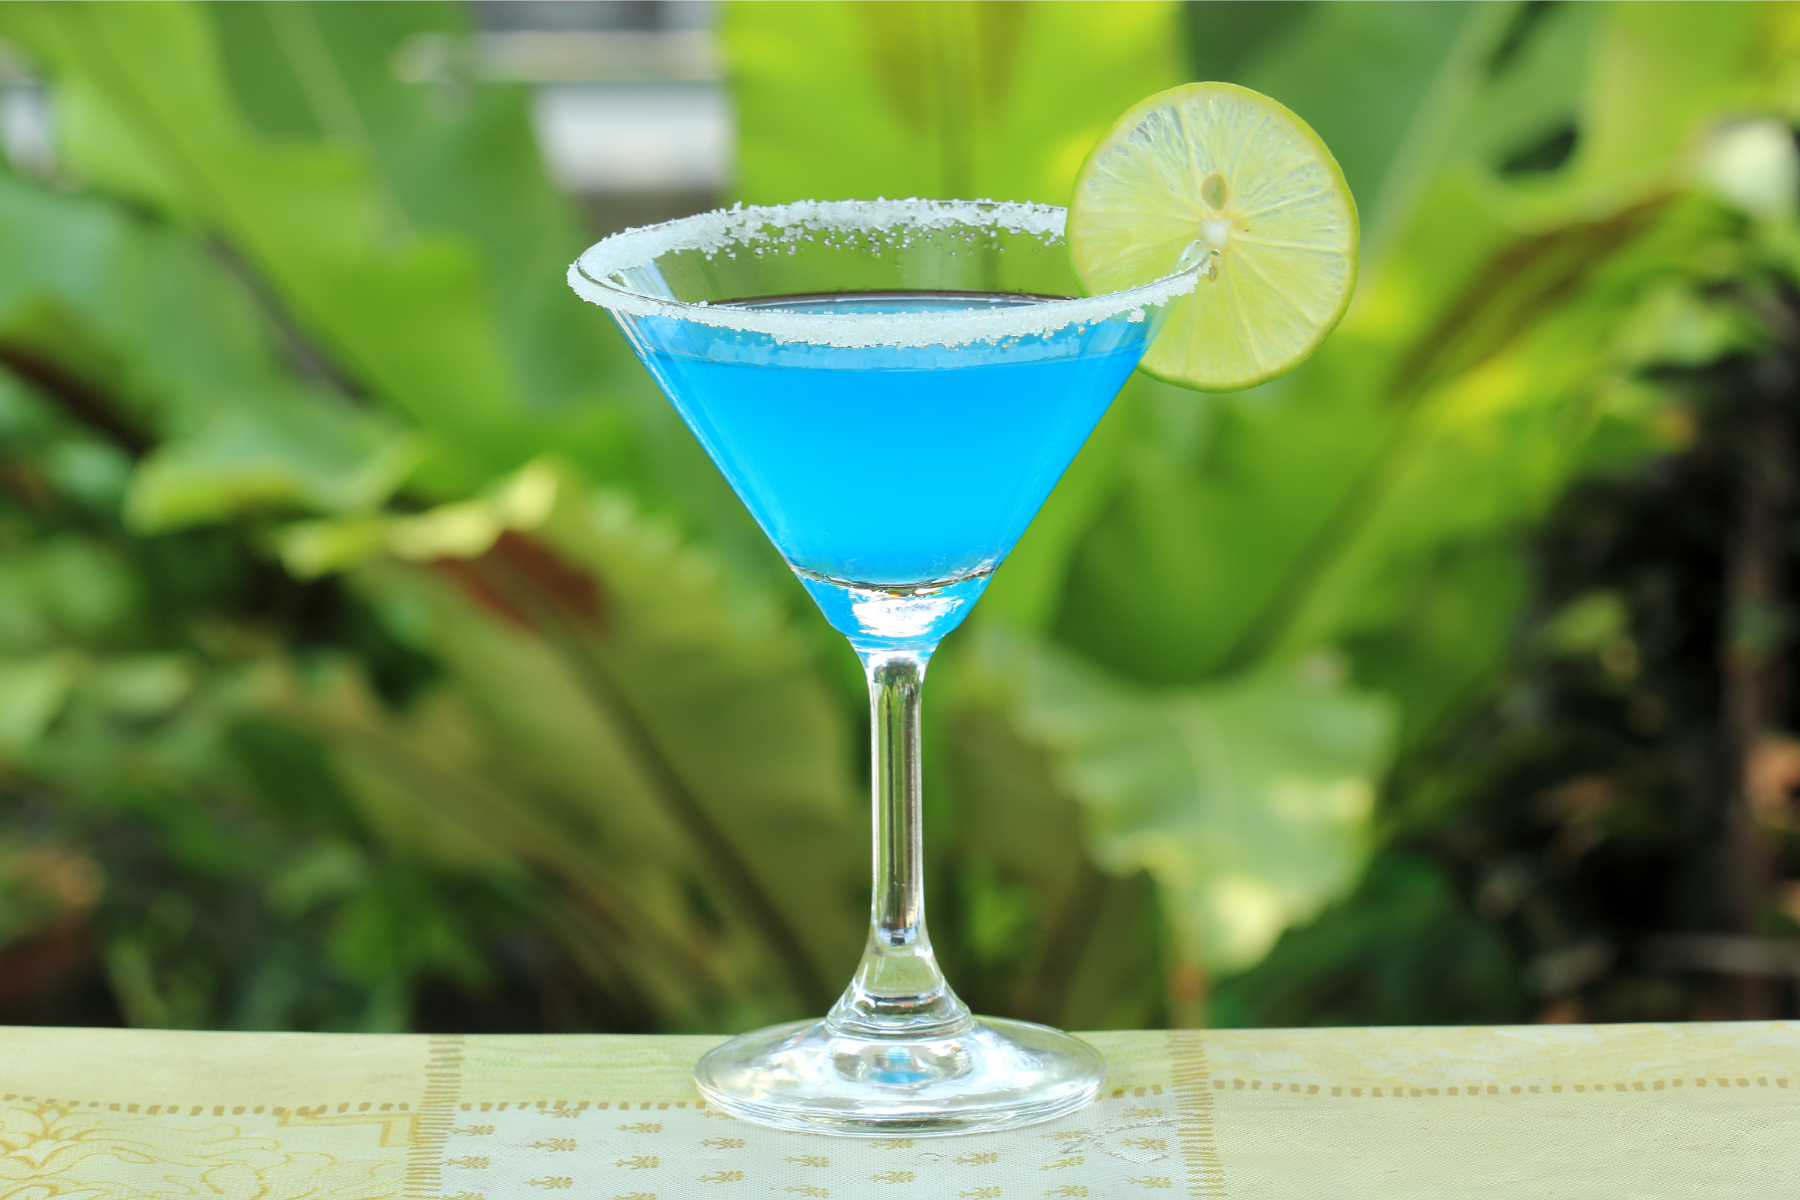 Get Rid Of Your “Blues” With Tribe’s CBD Blue Margarita